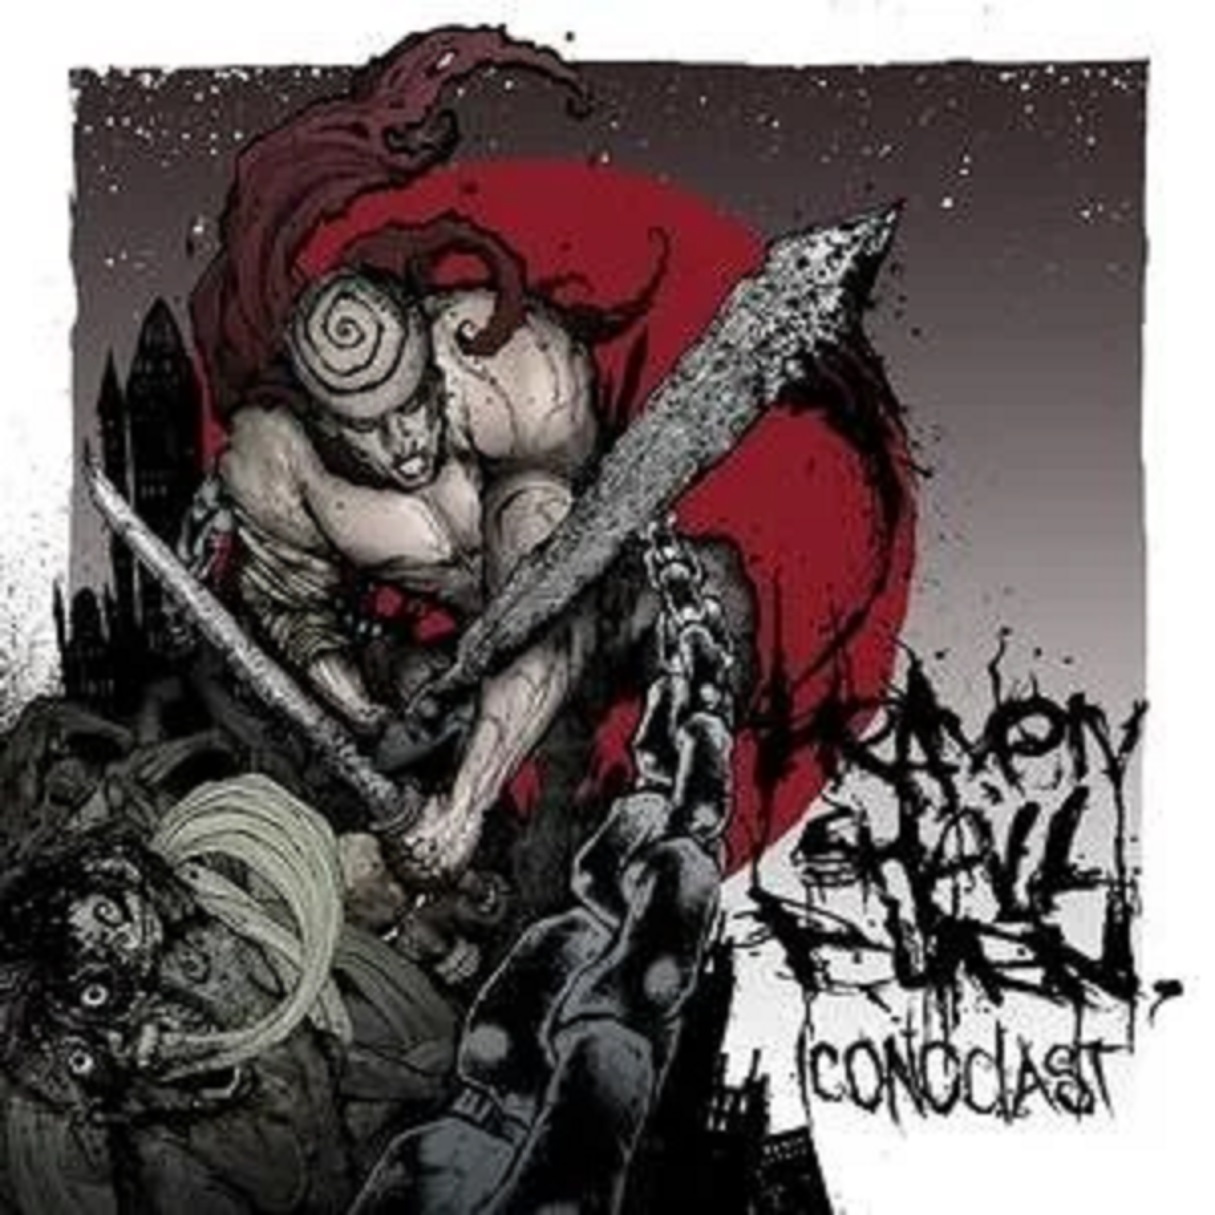 Iconoclast (part One: The Final Resistance) | Heaven Shall Burn